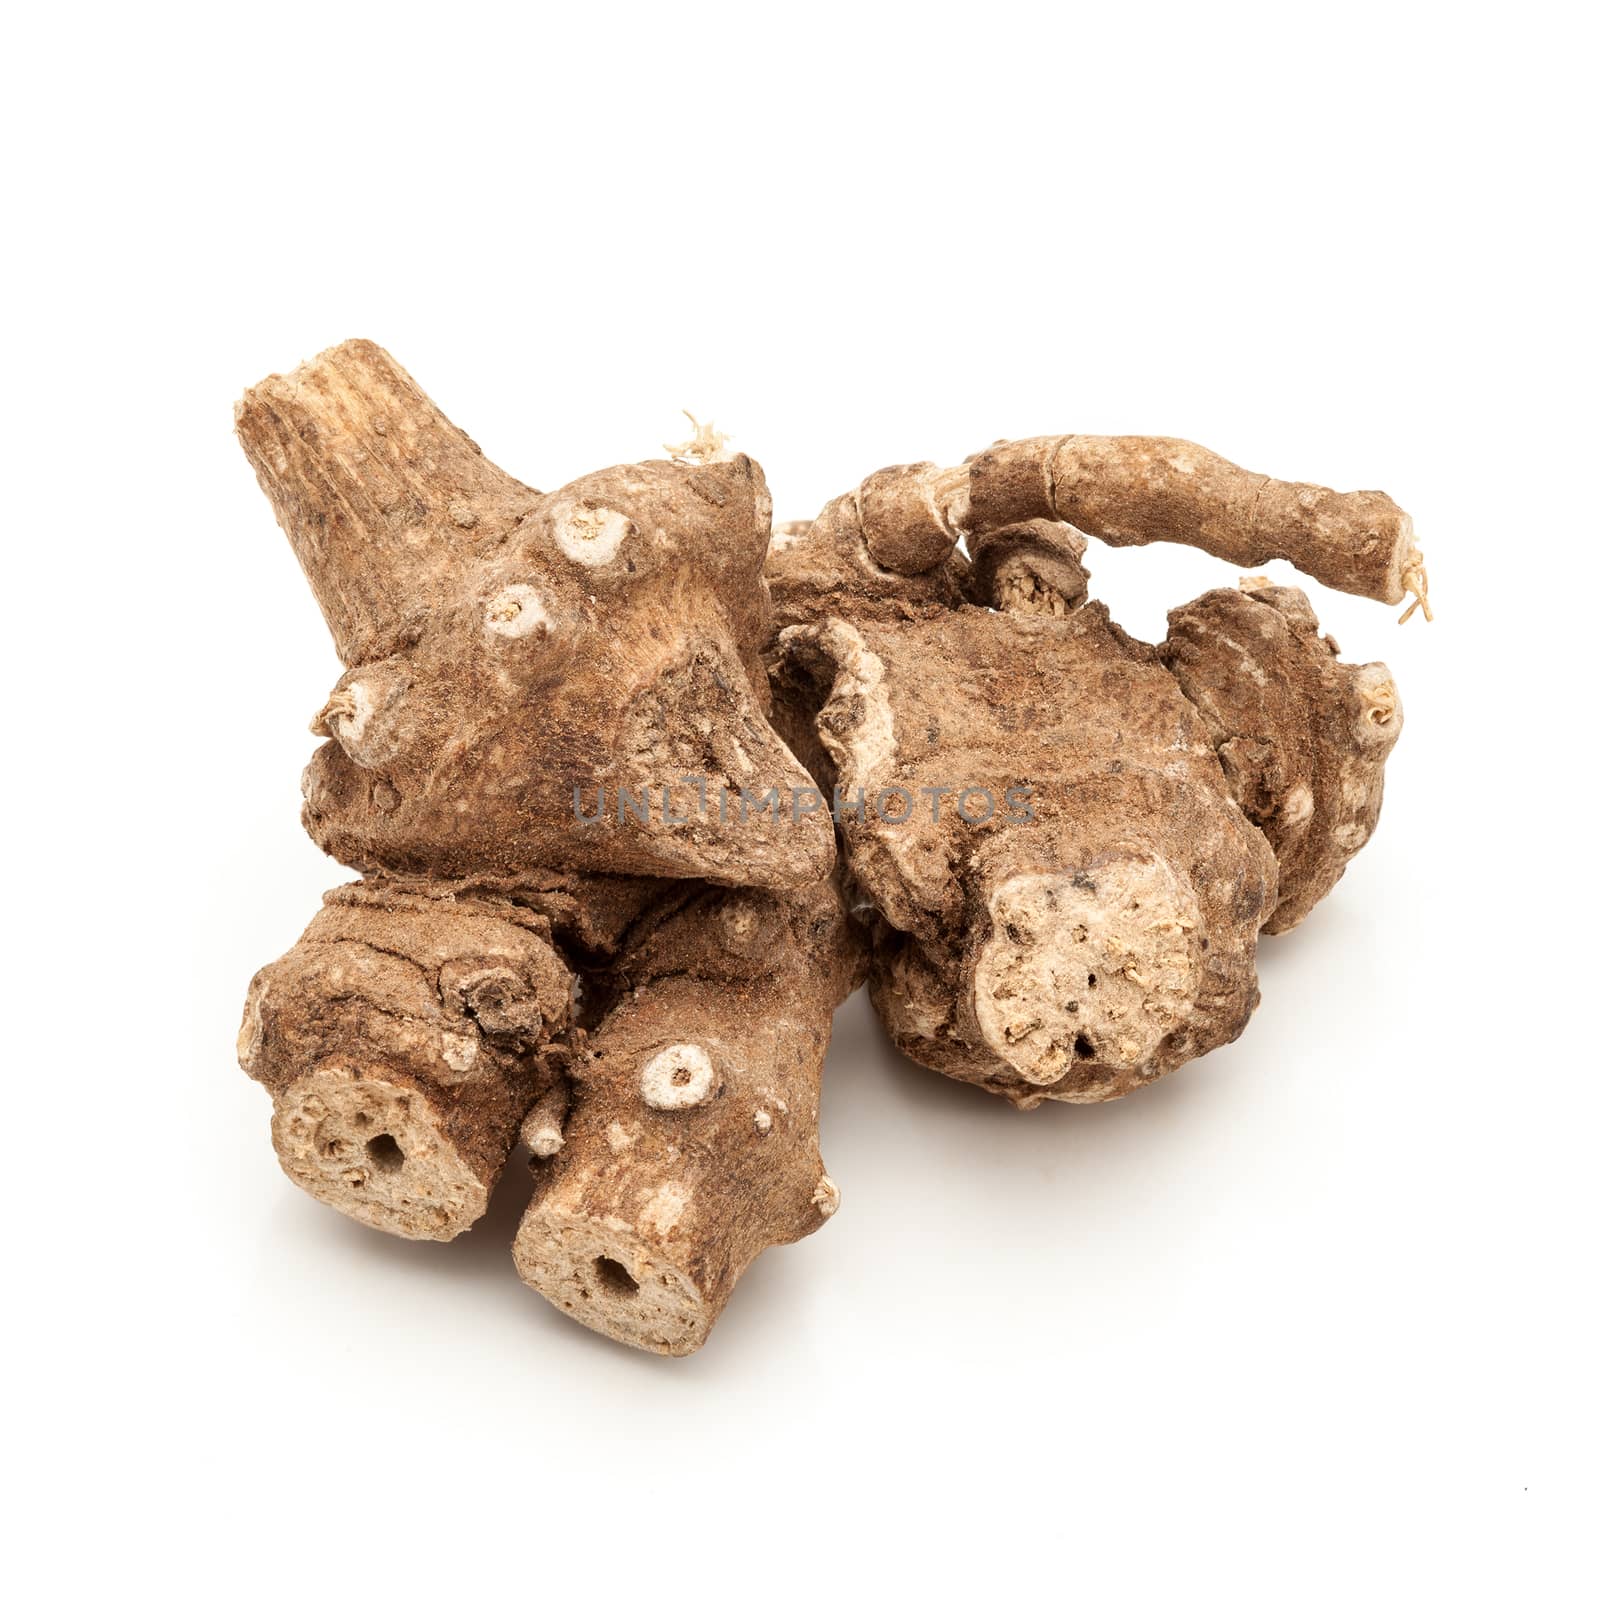 Macro closeup of a Organic Ganthoda or Long pepper Roots (Piper longum) isolated on white background.